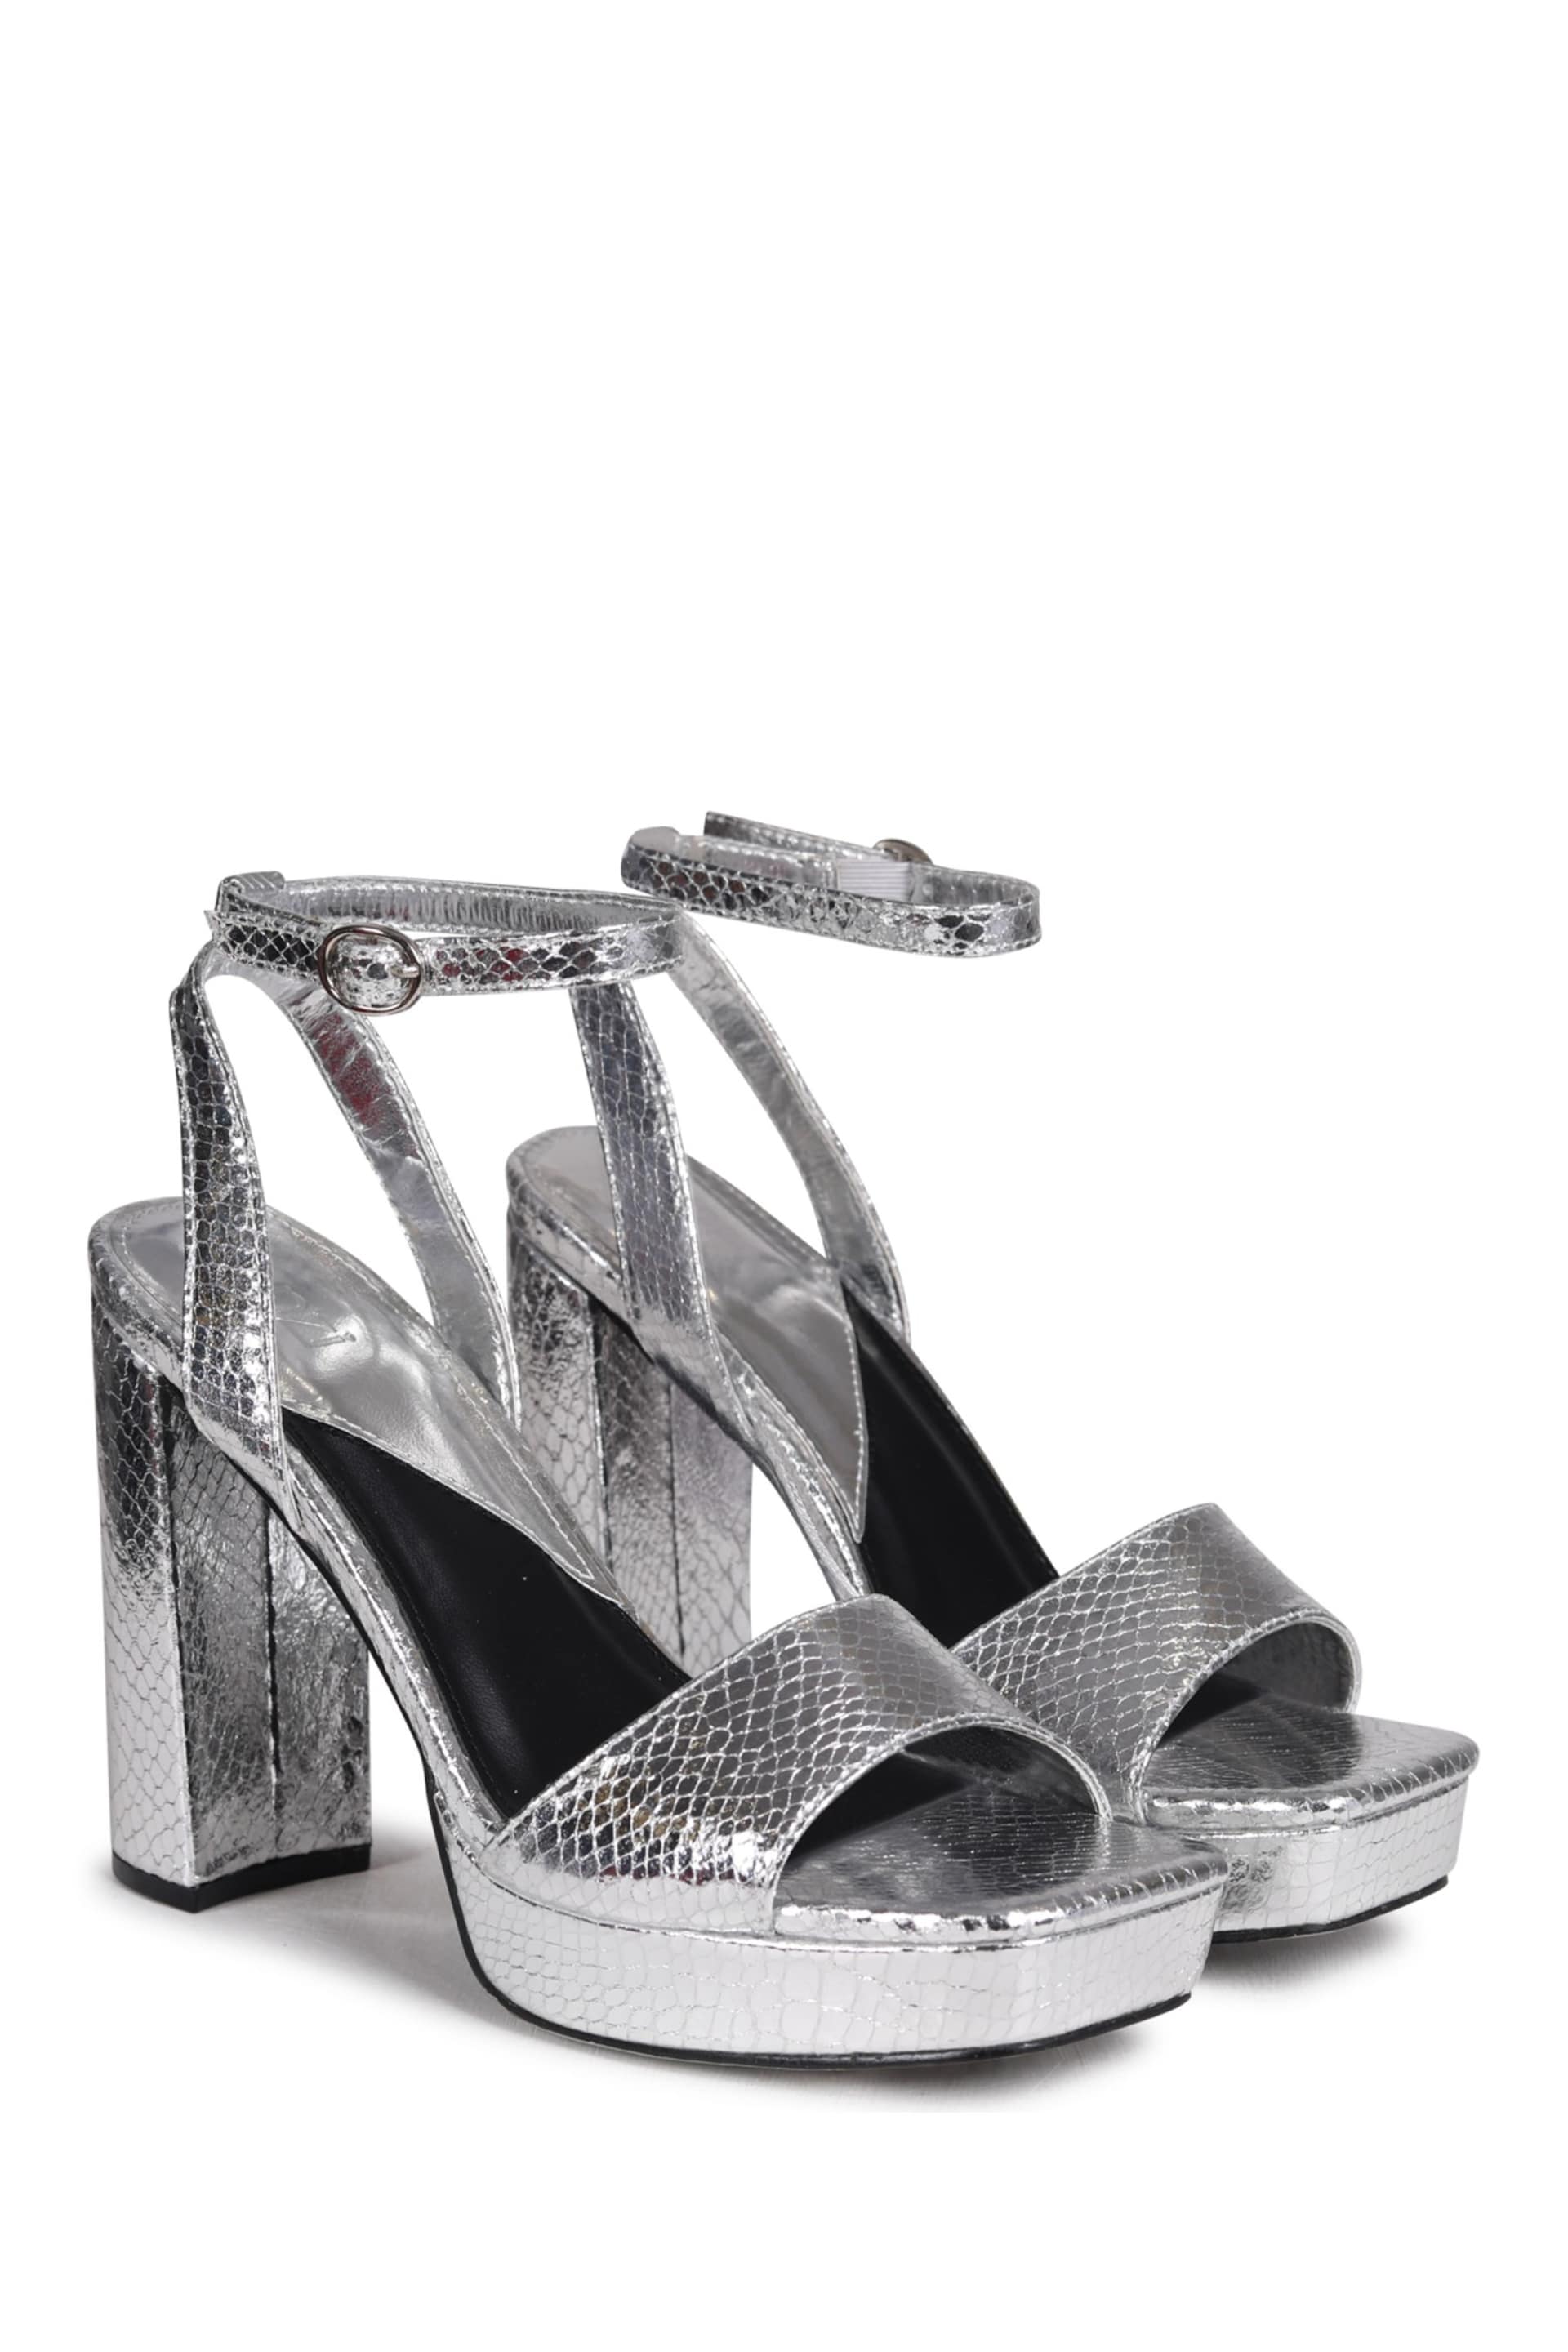 Linzi Silver Gloria Platform Heeled Sandals With Wrap Around Ankle Strap - Image 3 of 4